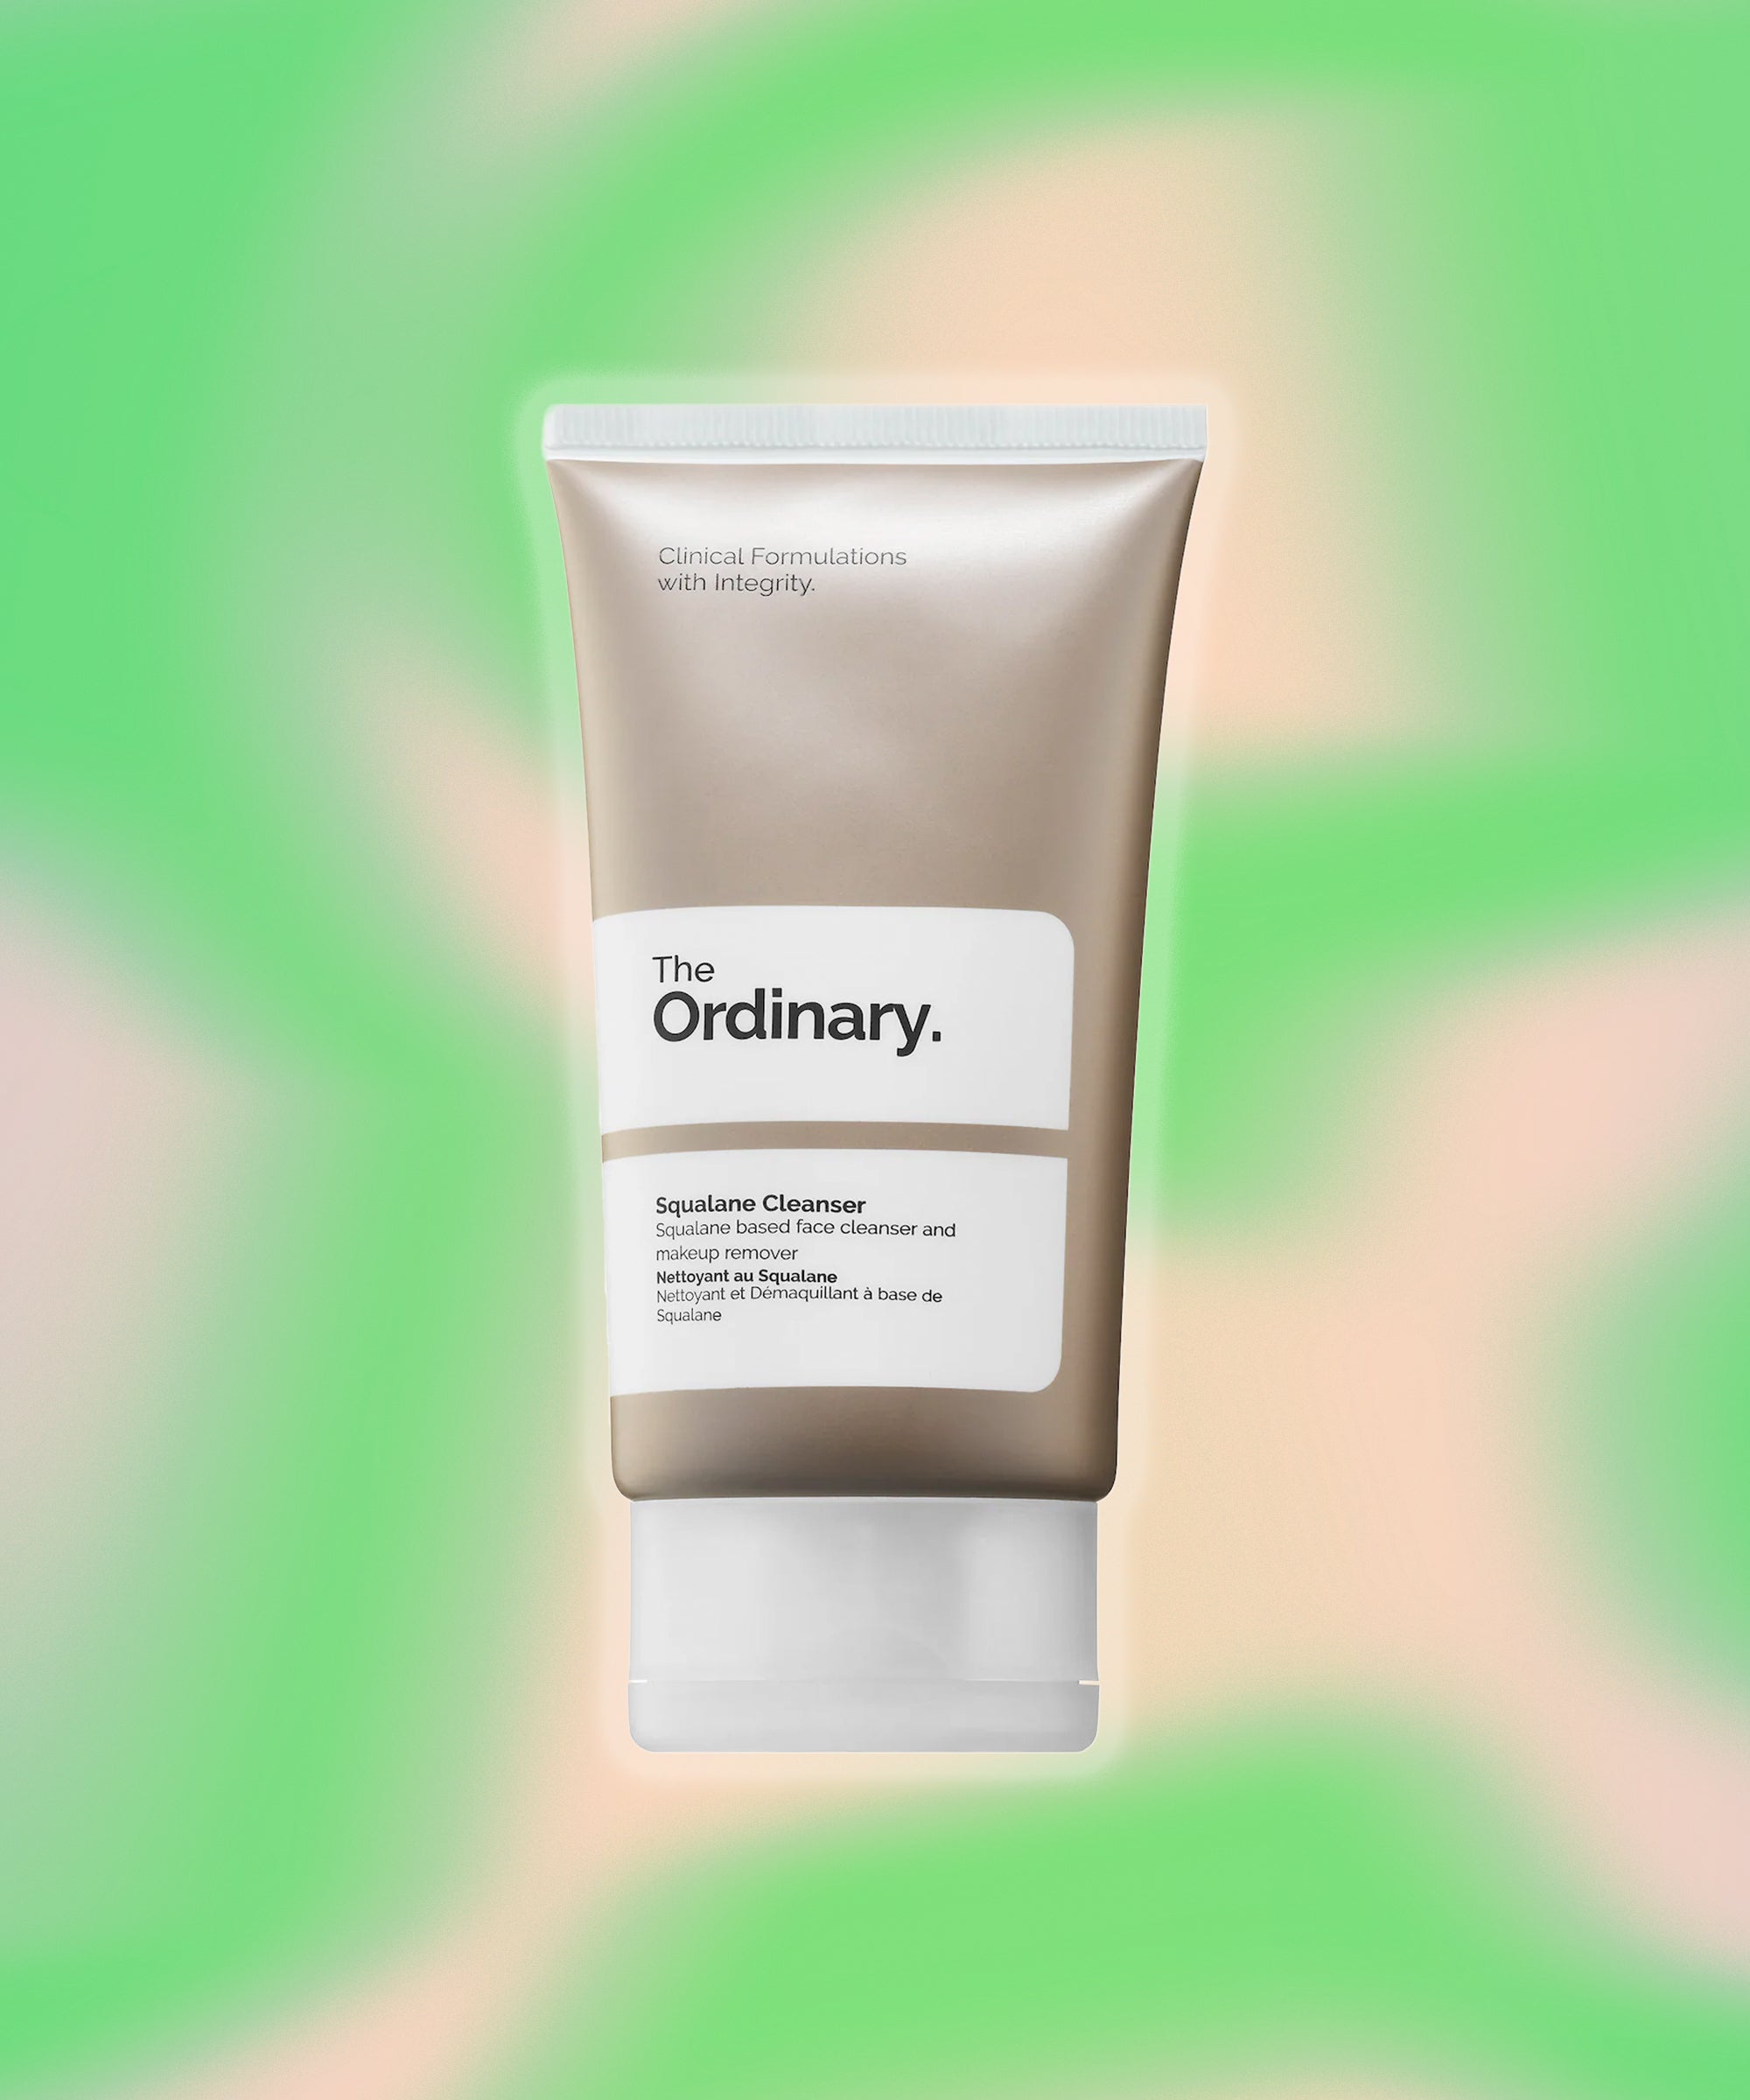 Is Your Skin Feeling Sandy? These Products Smooth Out Uneven Texture